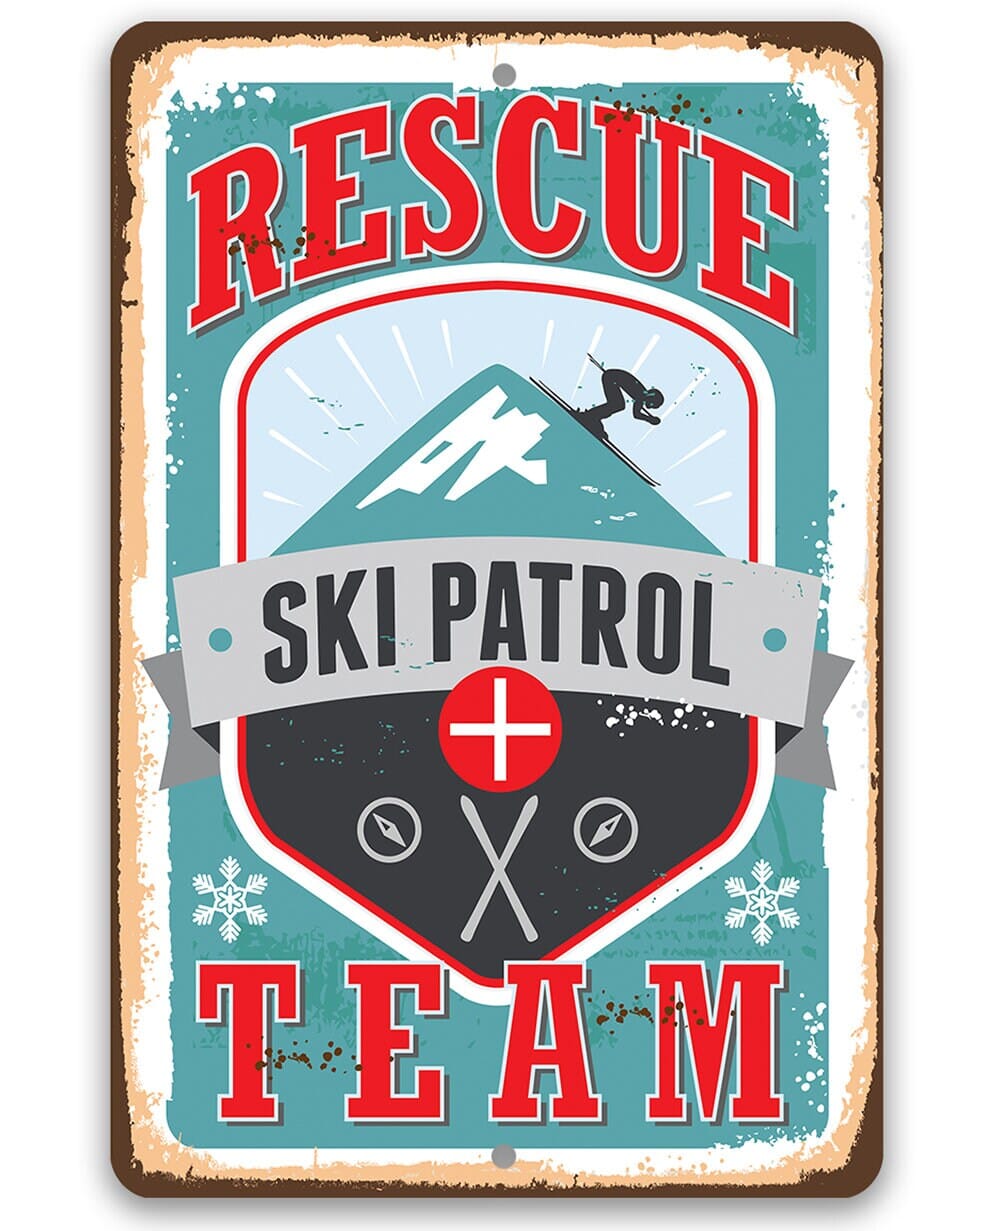 Ski Patrol Rescue Team - Rustic Style Emergency Response Unit Sign 8" x 12" or 12" x 18" Aluminum Tin Awesome Metal Poster Lone Star Art 